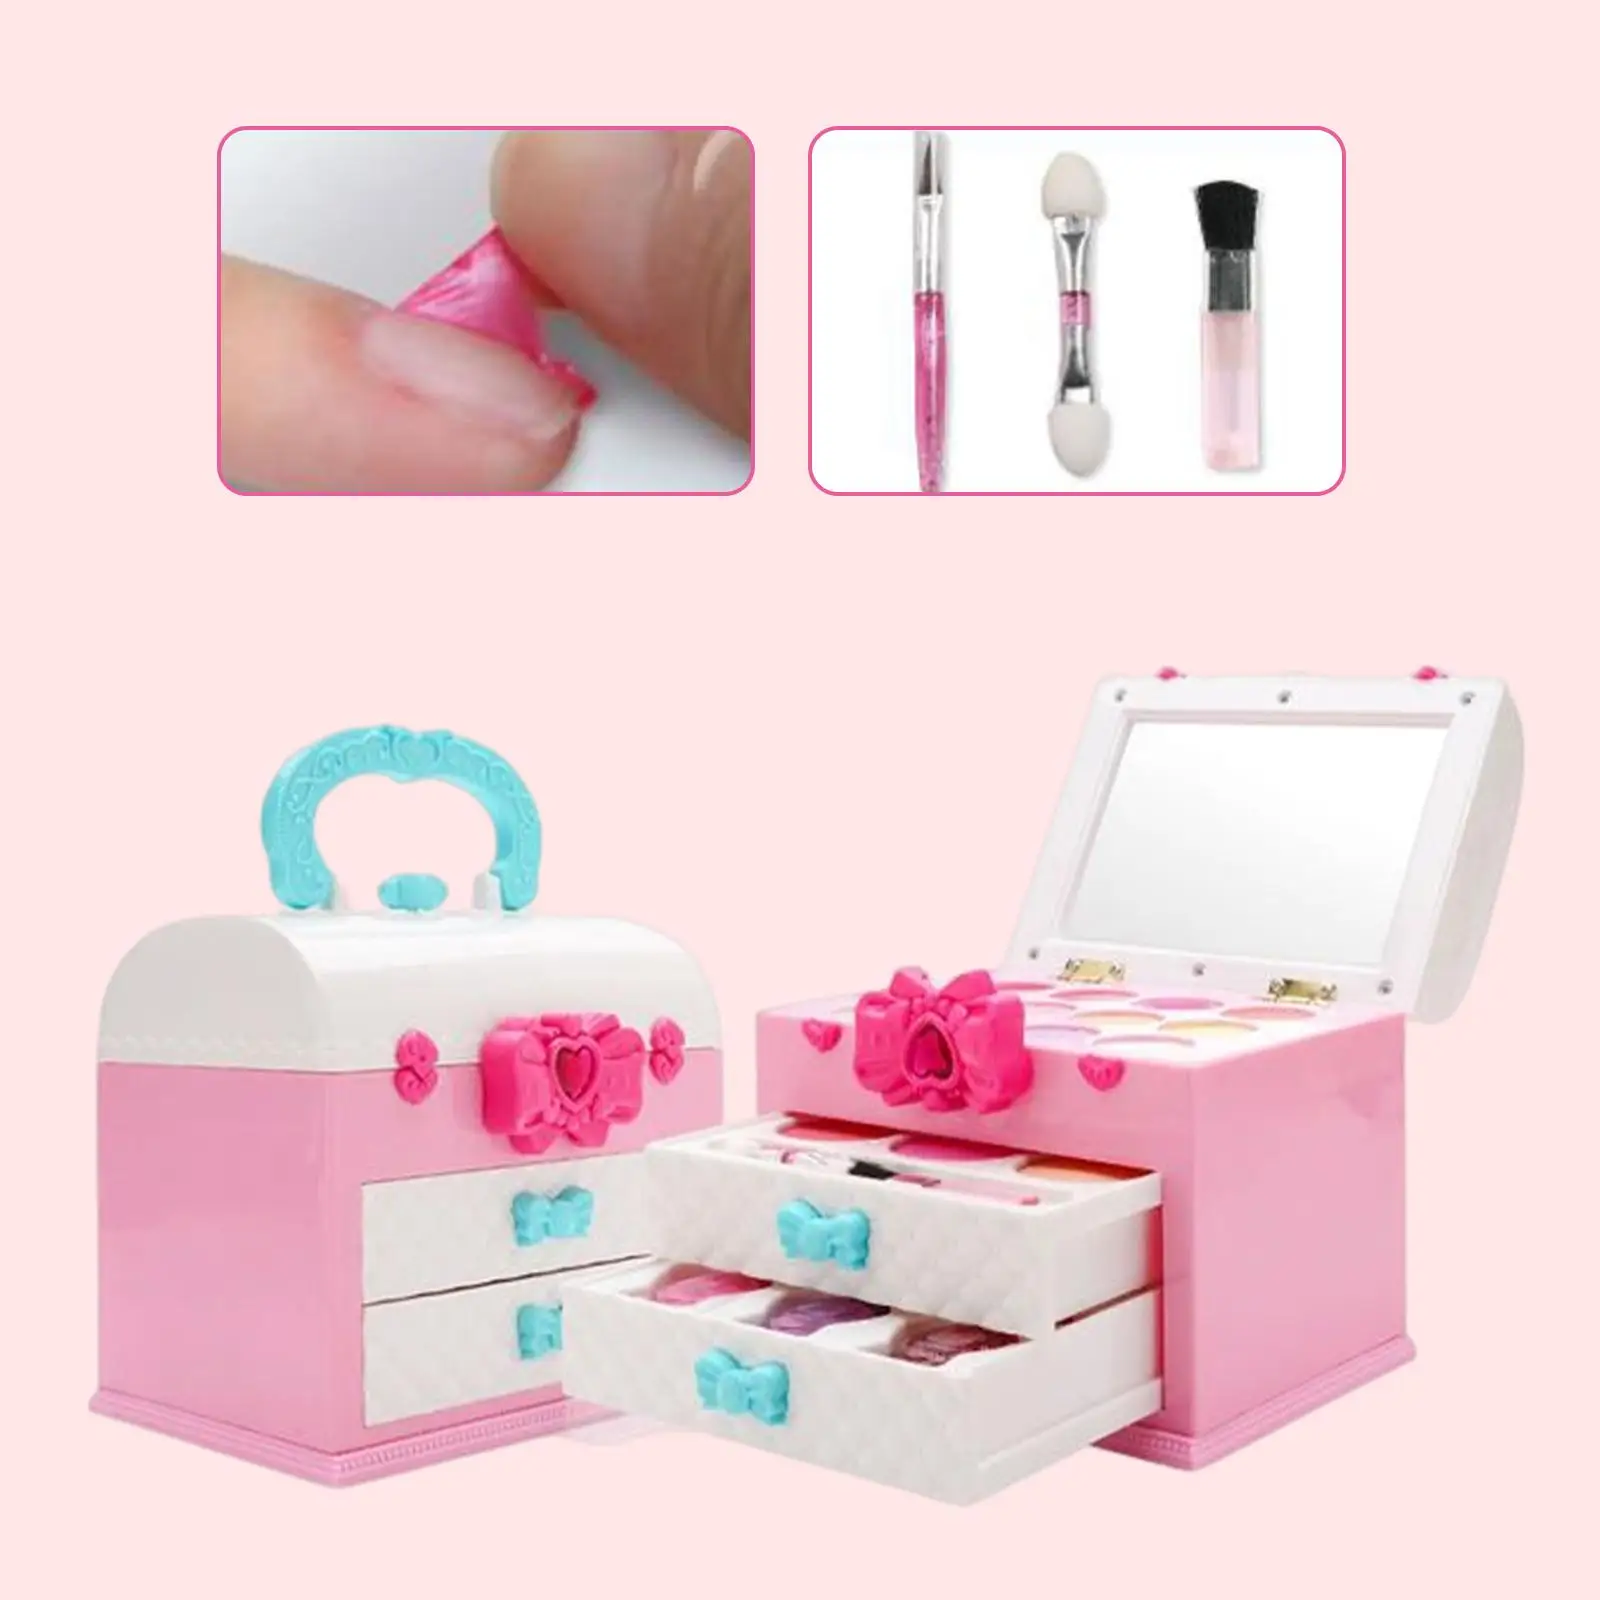 Kids Makeup for Girl Pretend Game Play House Toys Set Dress up Little Girl Makeup Set for Children Girls Party Favors Gifts